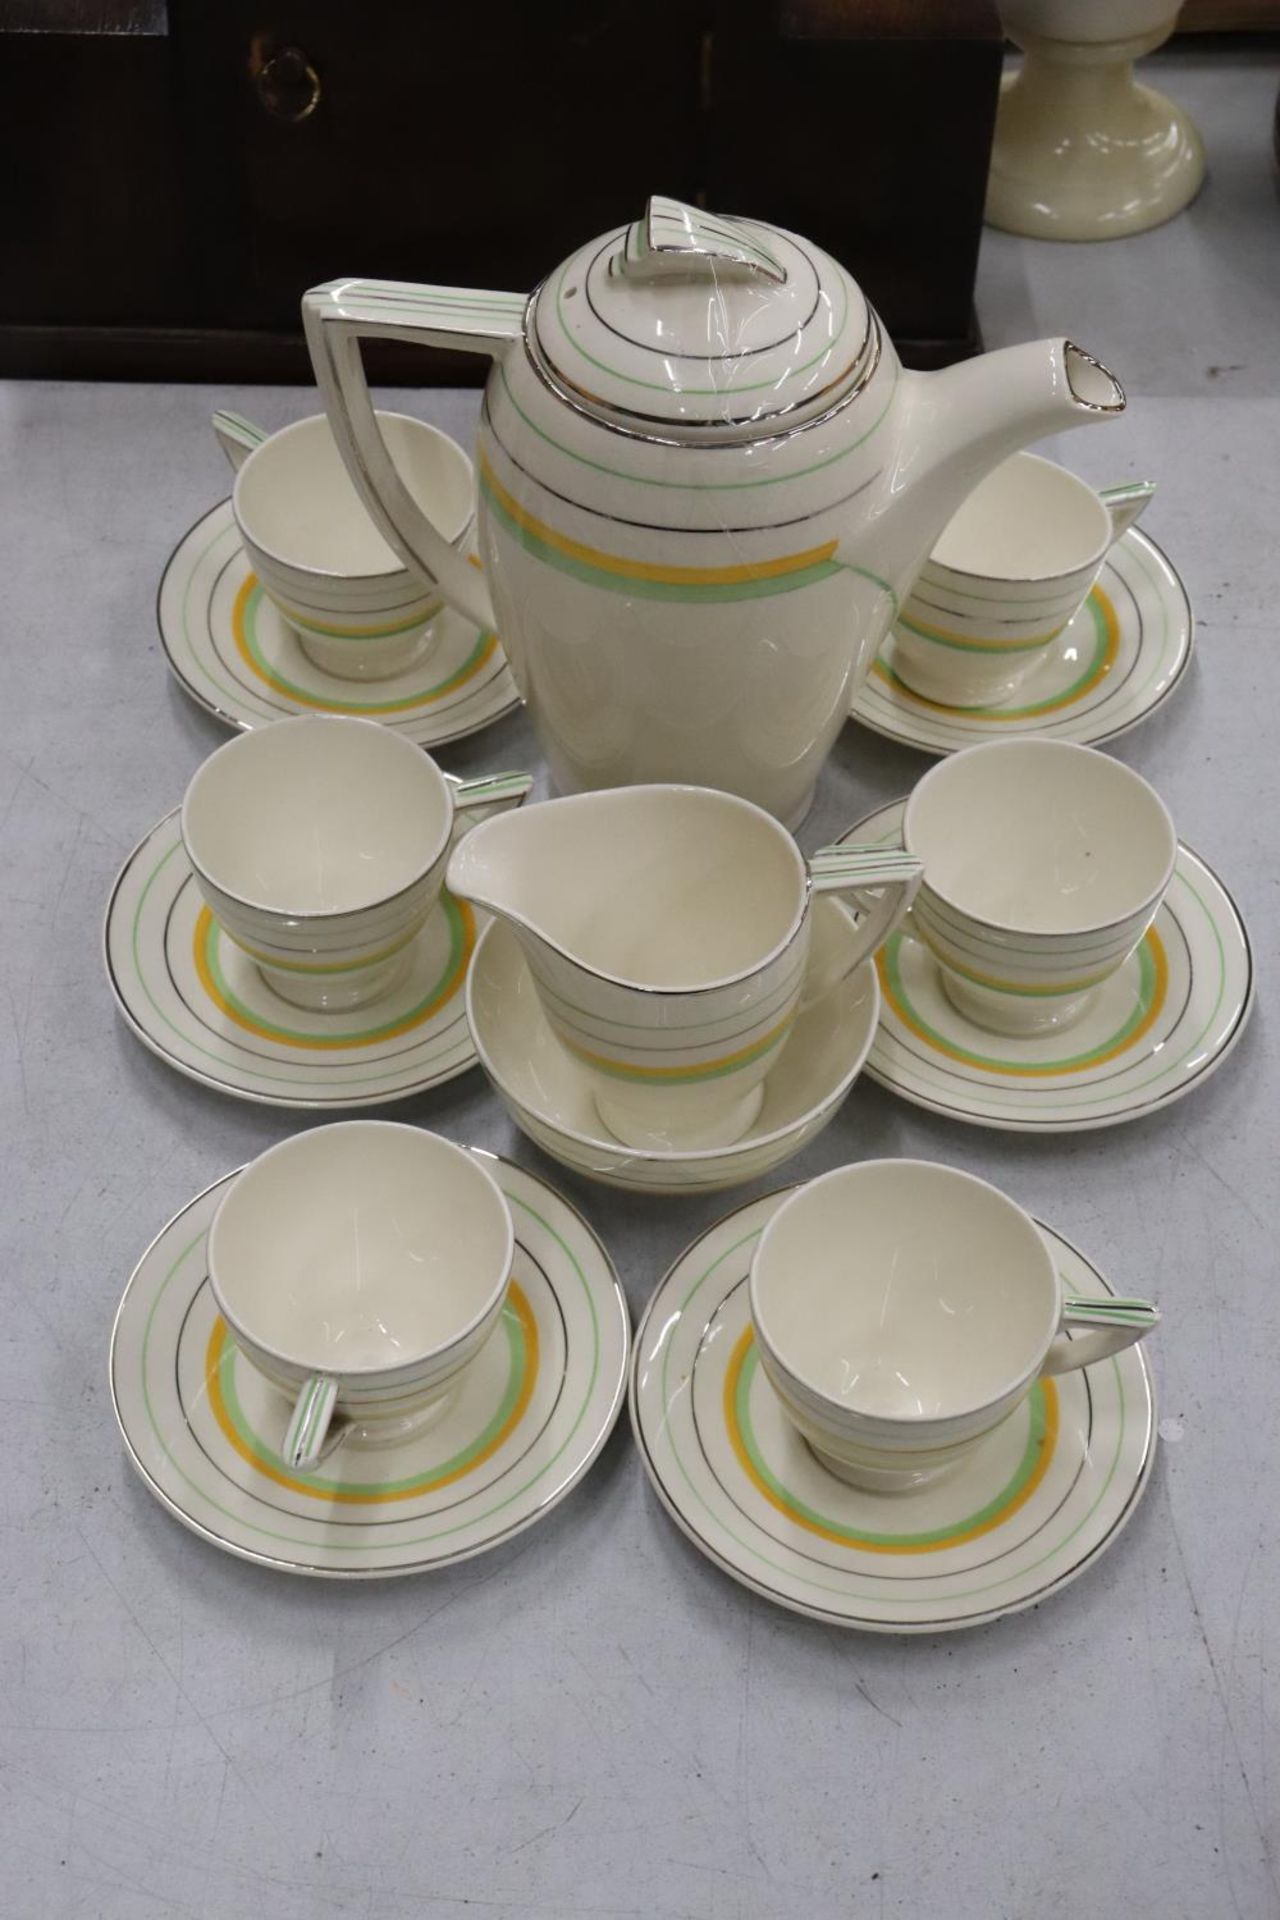 A WEDGWOOD ART DECO COFFEE SET TO INCLUDE A COFFEE POT, CREAM JUG, SUGAR BOWL, CUPS AND SAUCERS - 15